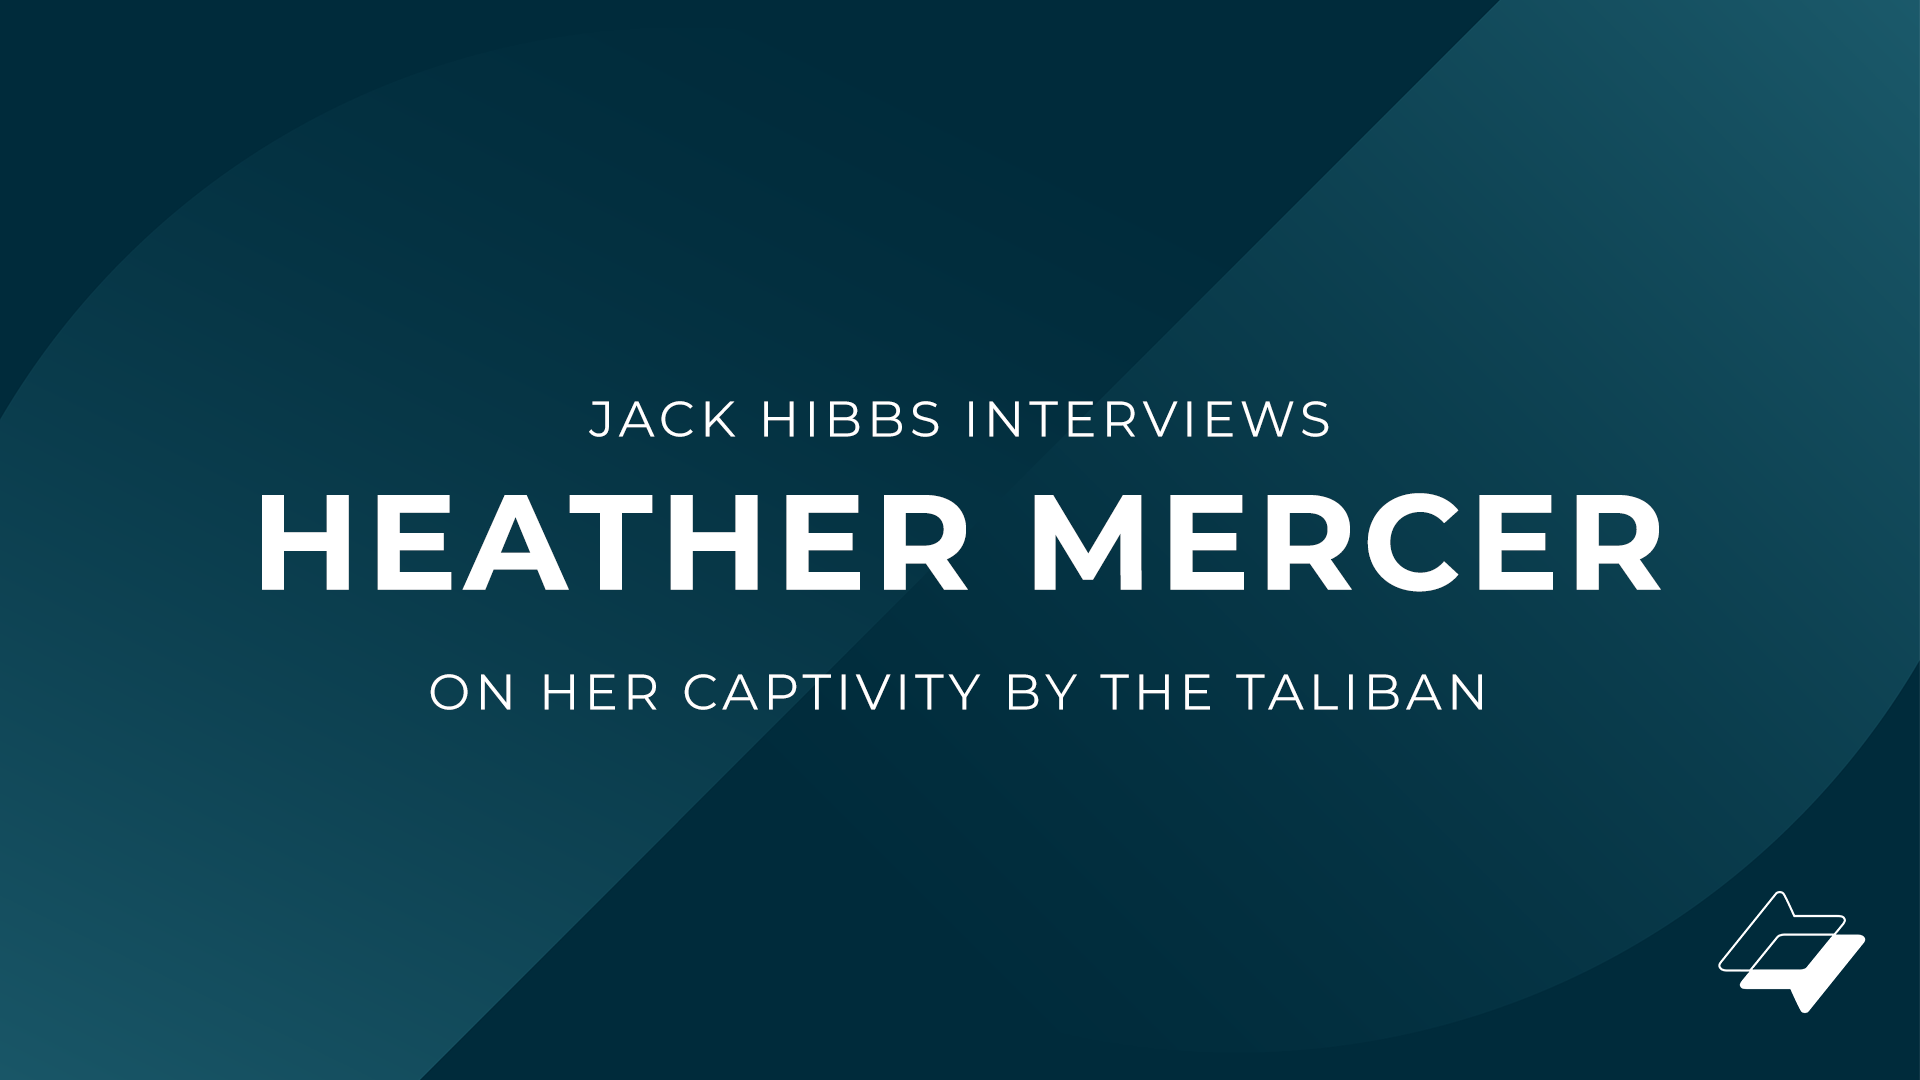 Pastor Jack interviews Heather Mercer on her captivity by the Taliban